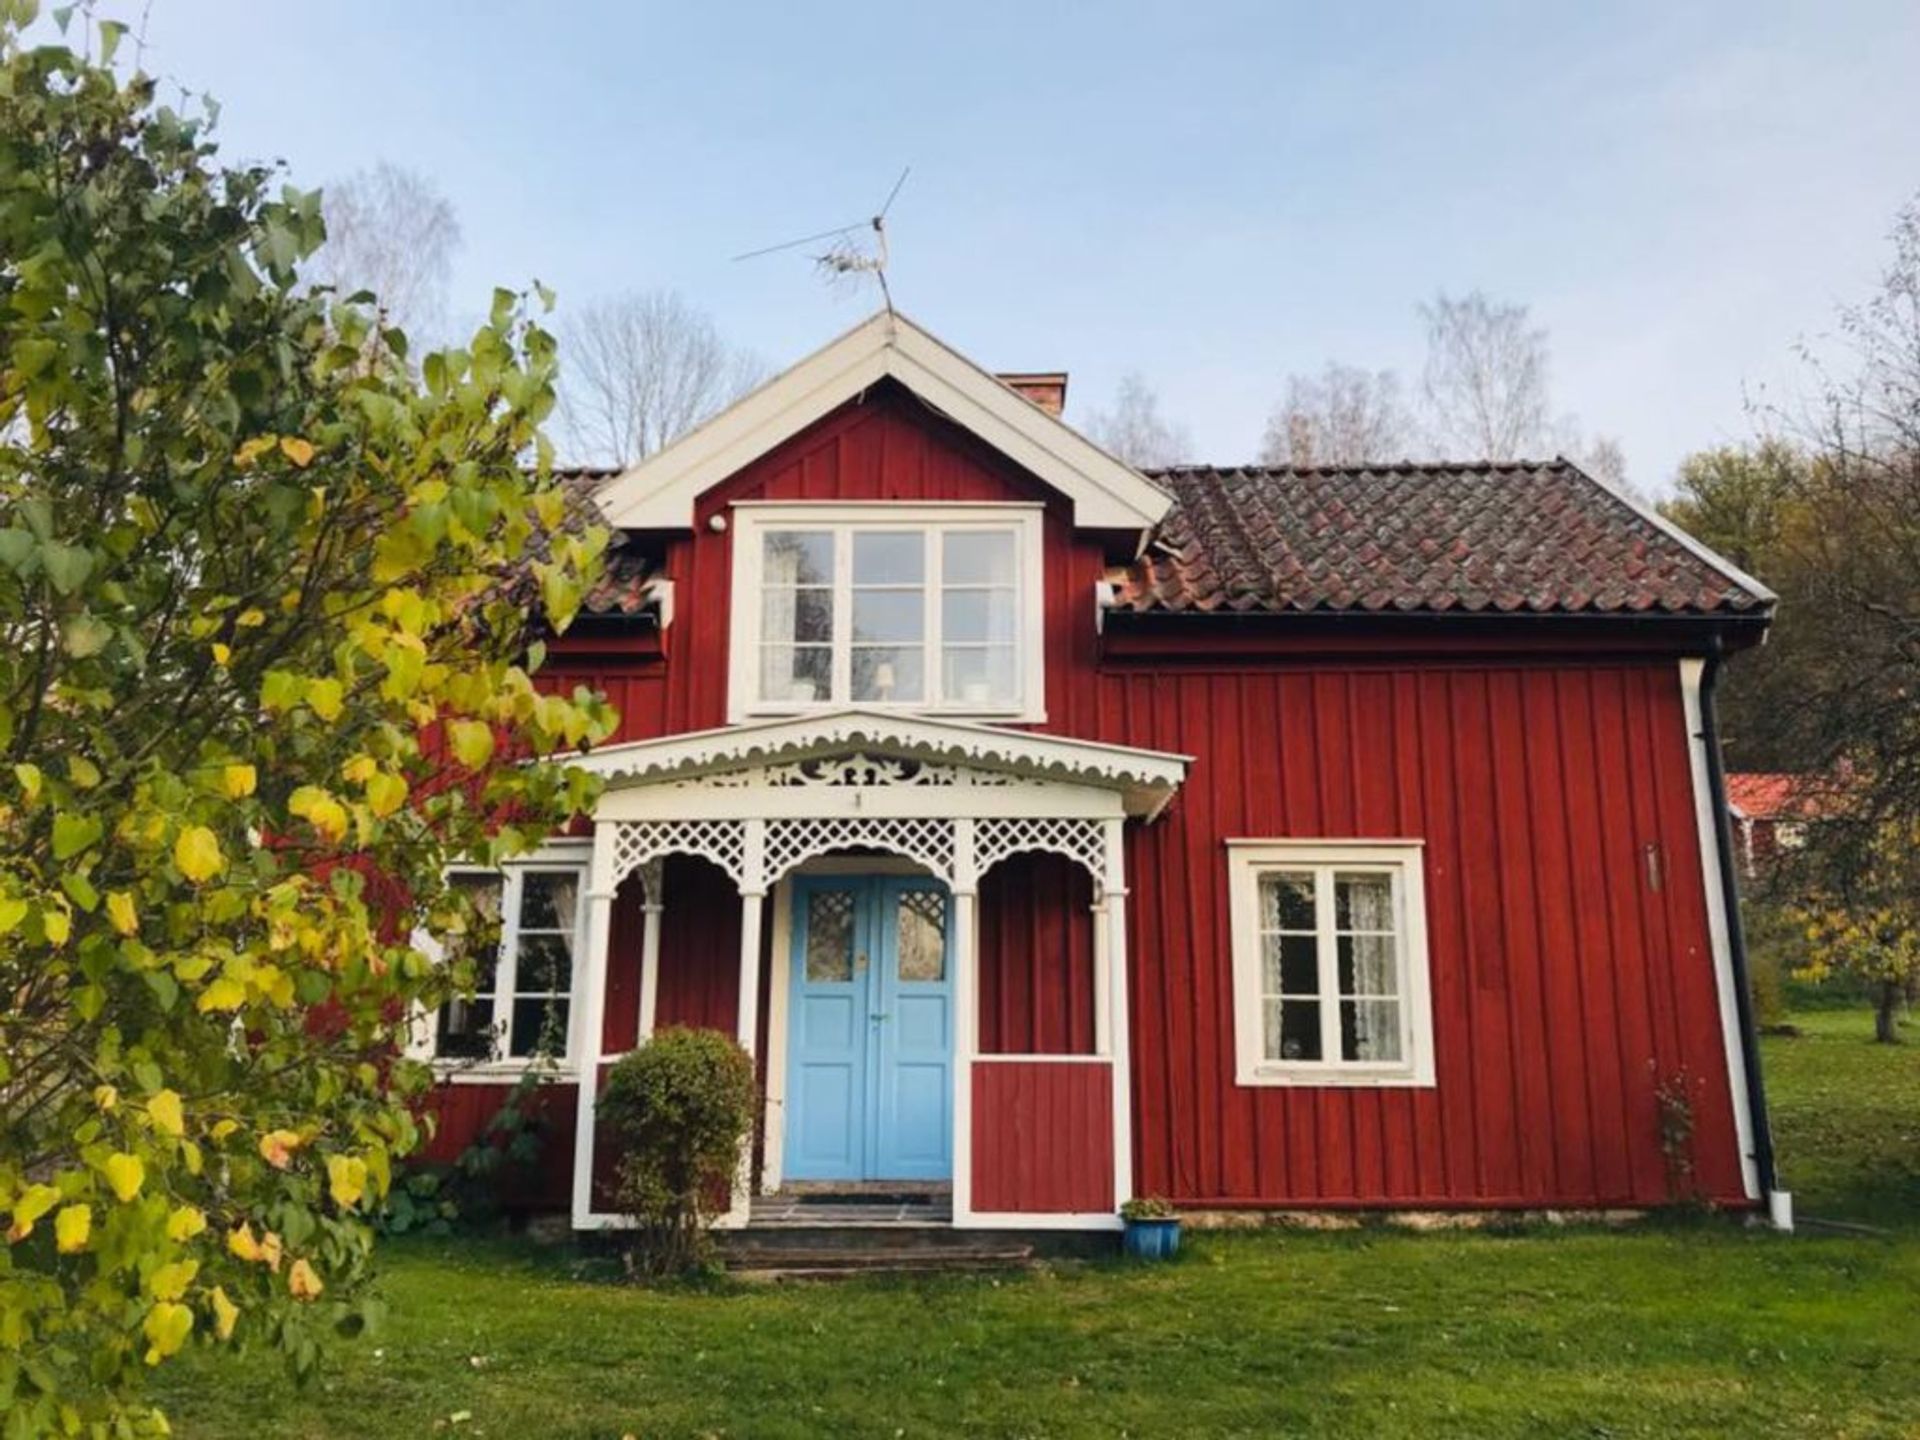 Small, wooden building pained in a traditional red Swedish paint.